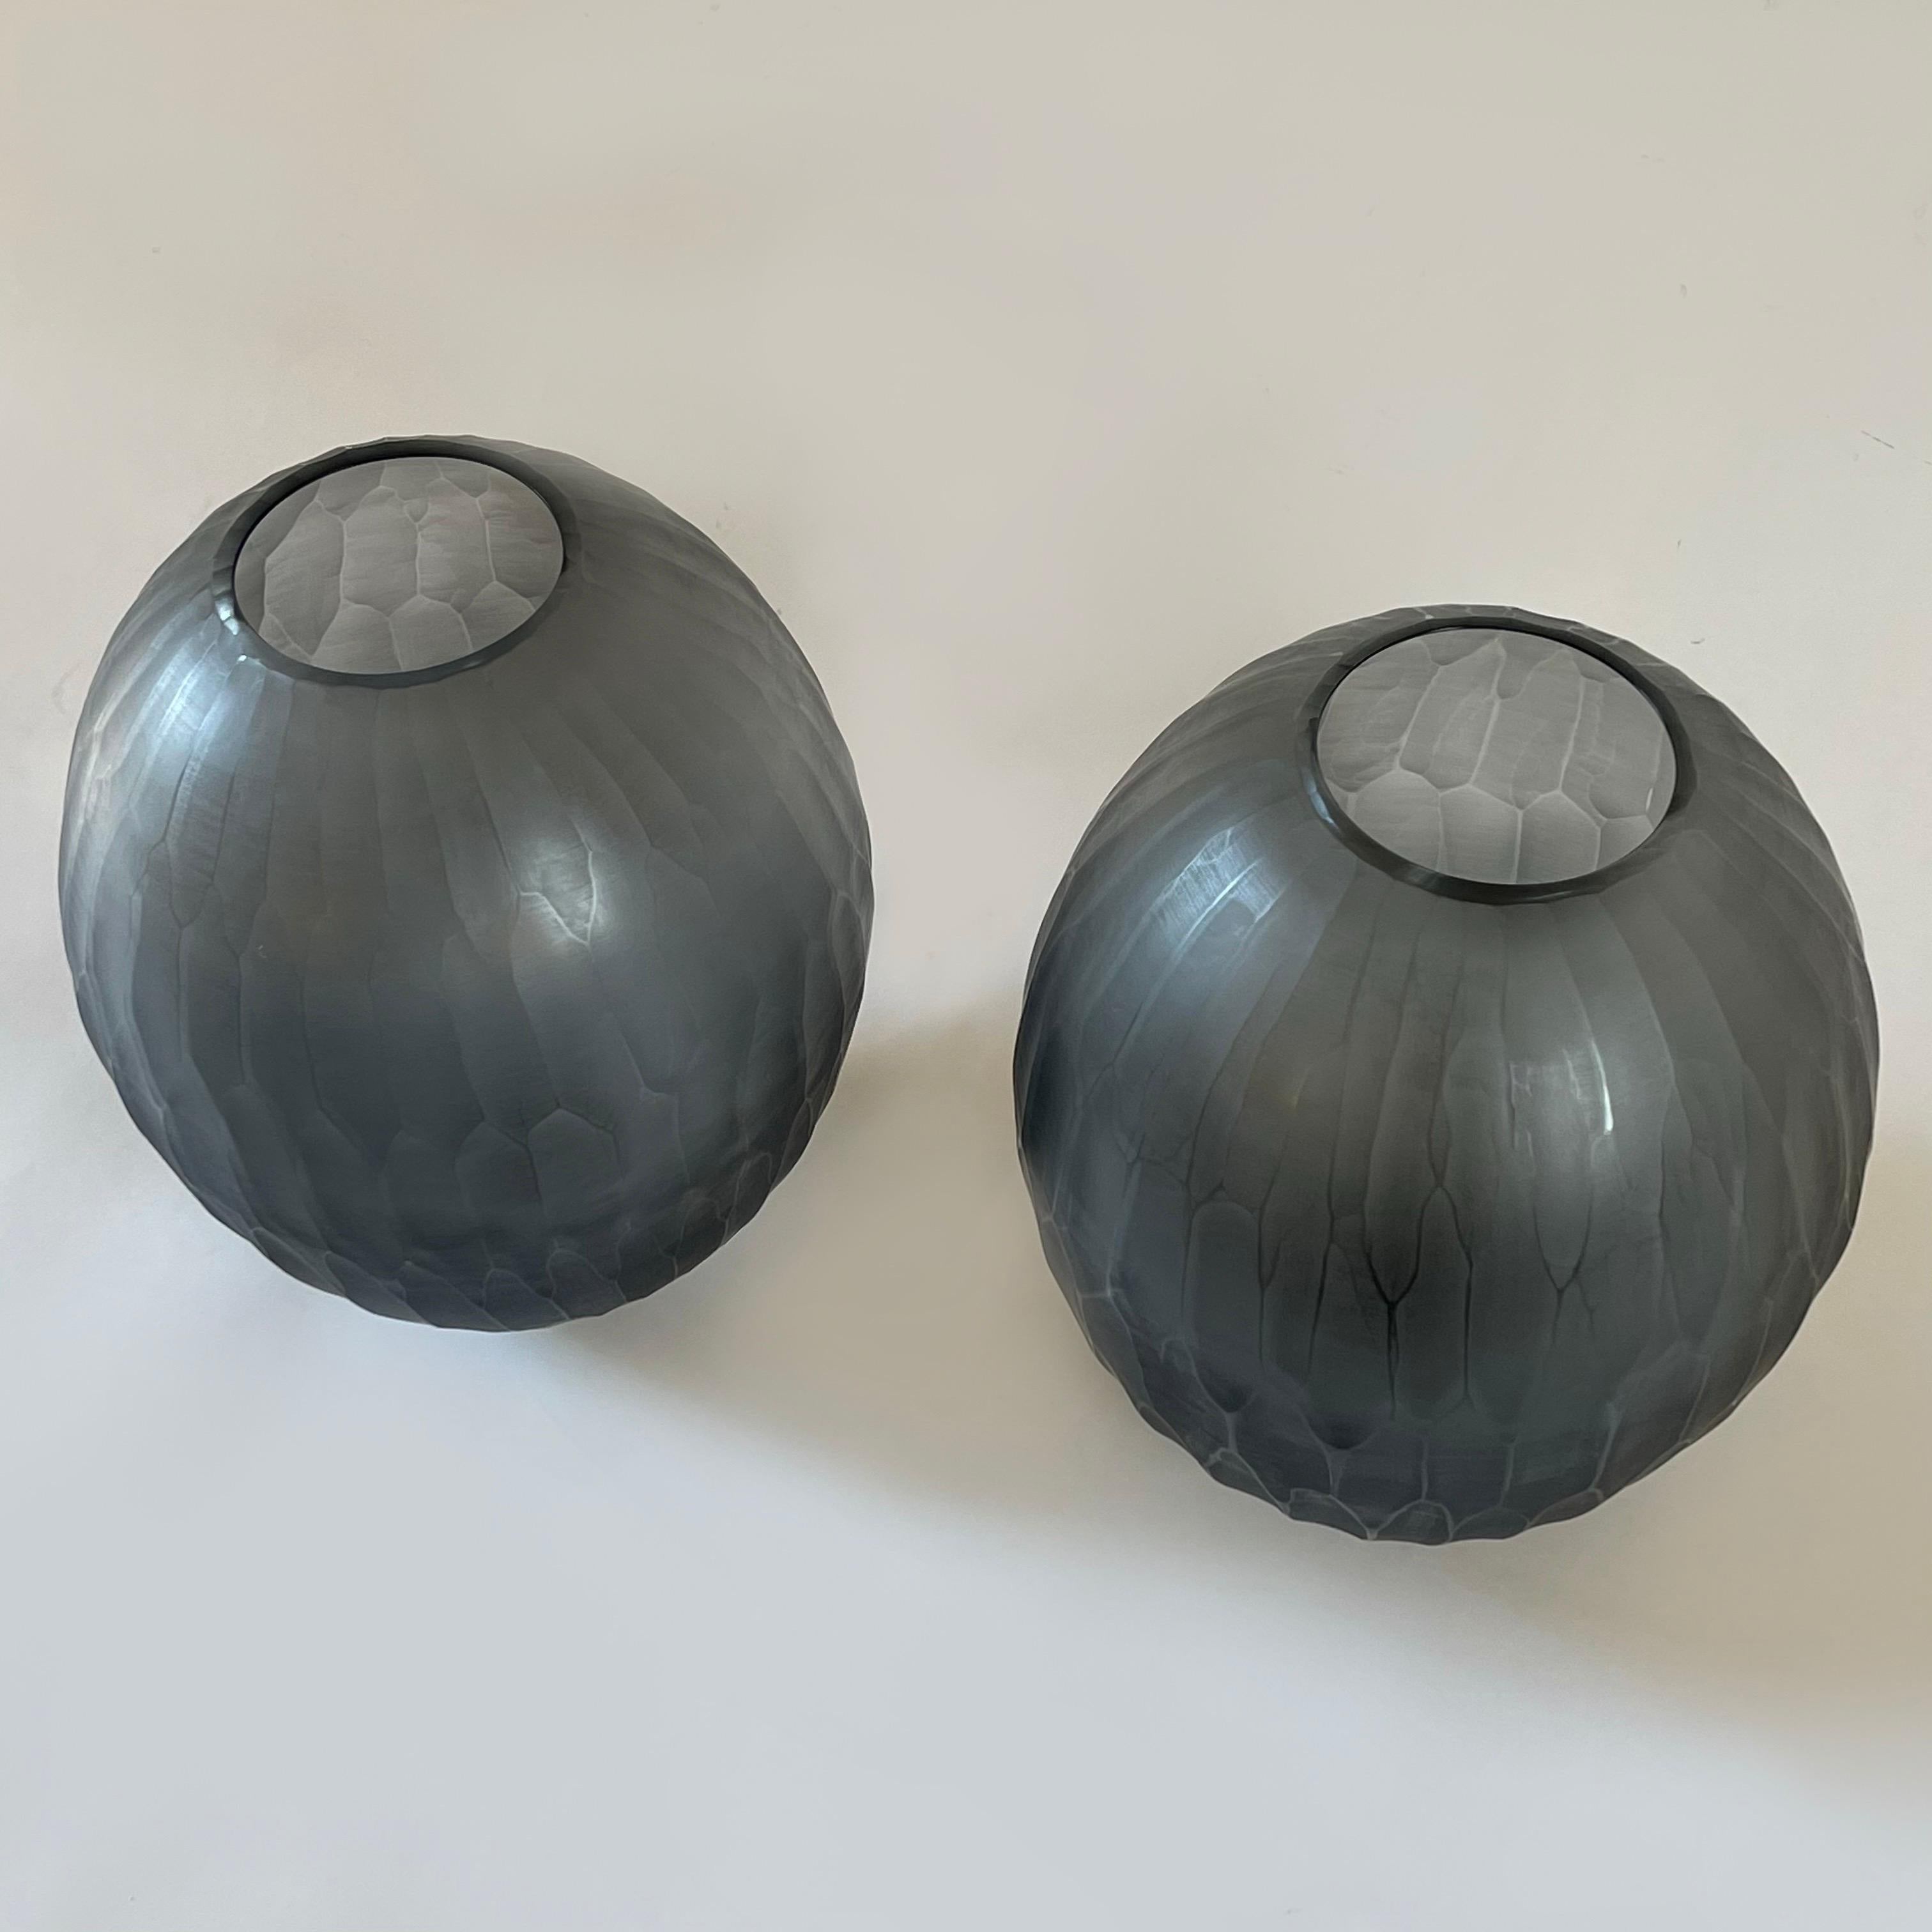 Pair of sculptural vases attributed to Davide Donà. Handmade faceted gray murano glass. Unsigned pieces.
Davide Donà started to learn the glassmaking first working in a paperweight furnace, then from 1998 in his father company.
In the 1970s he